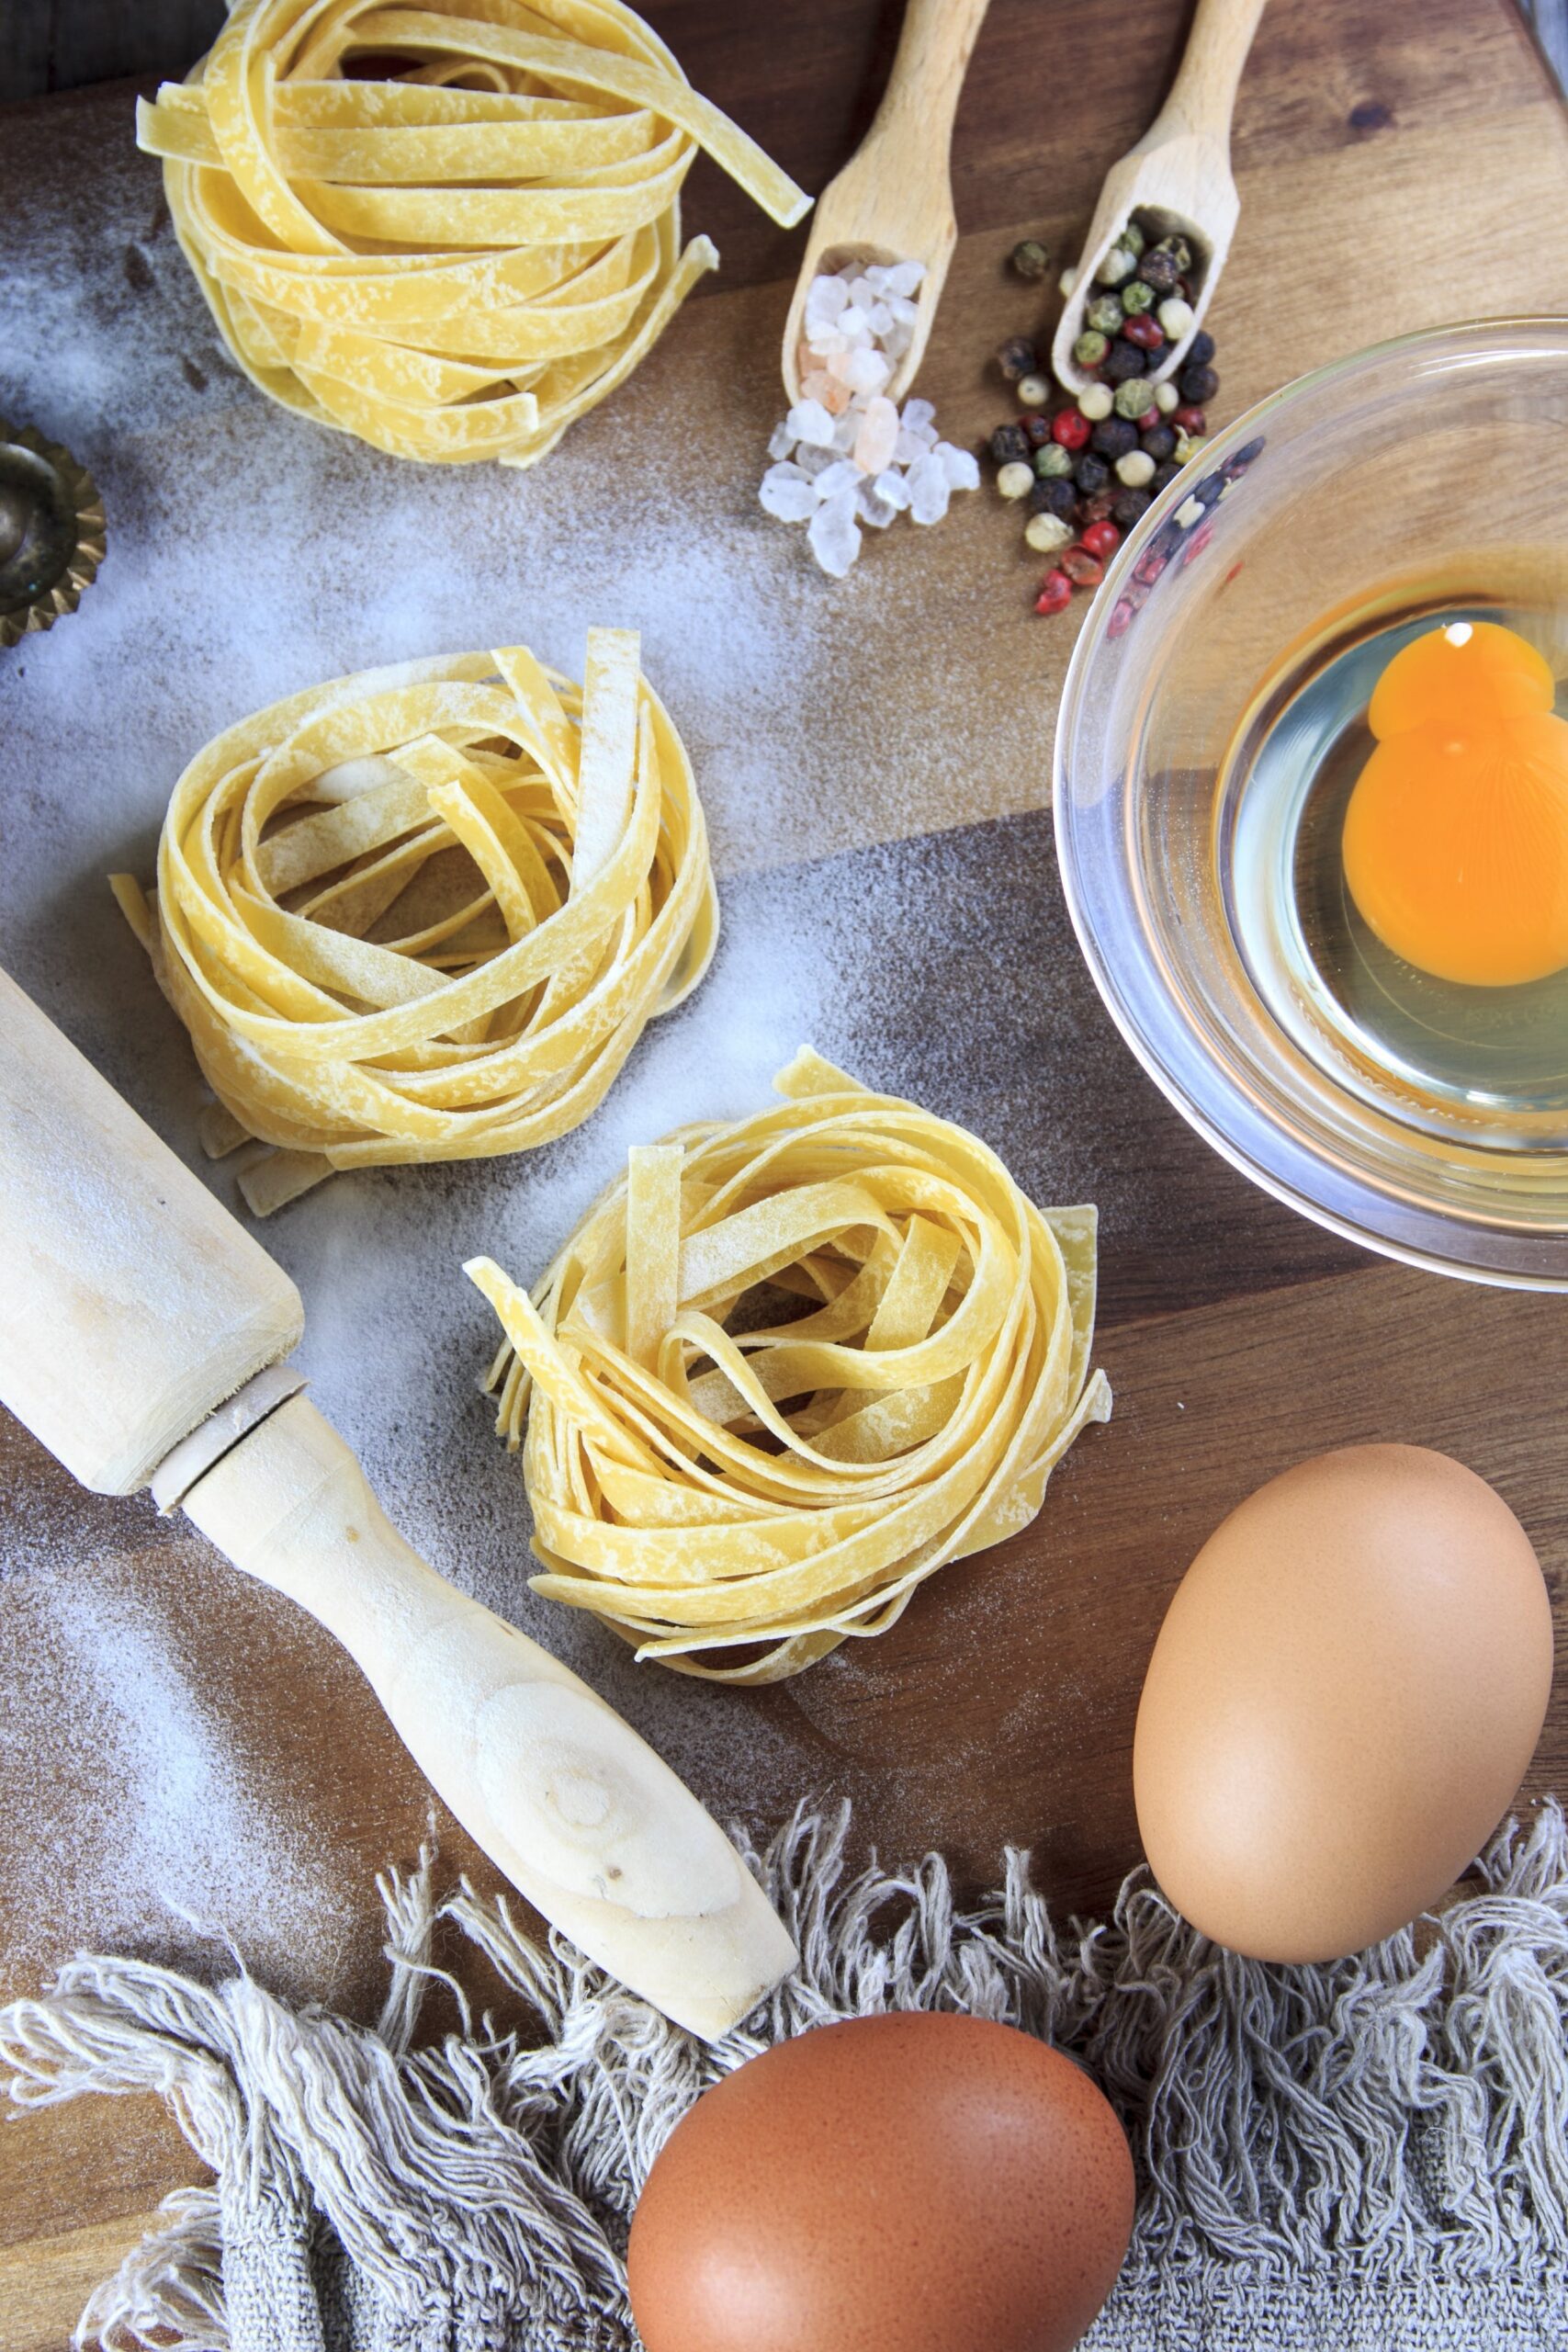 Can You Recommend A Speedy Italian Pasta Recipe For A Busy Day?